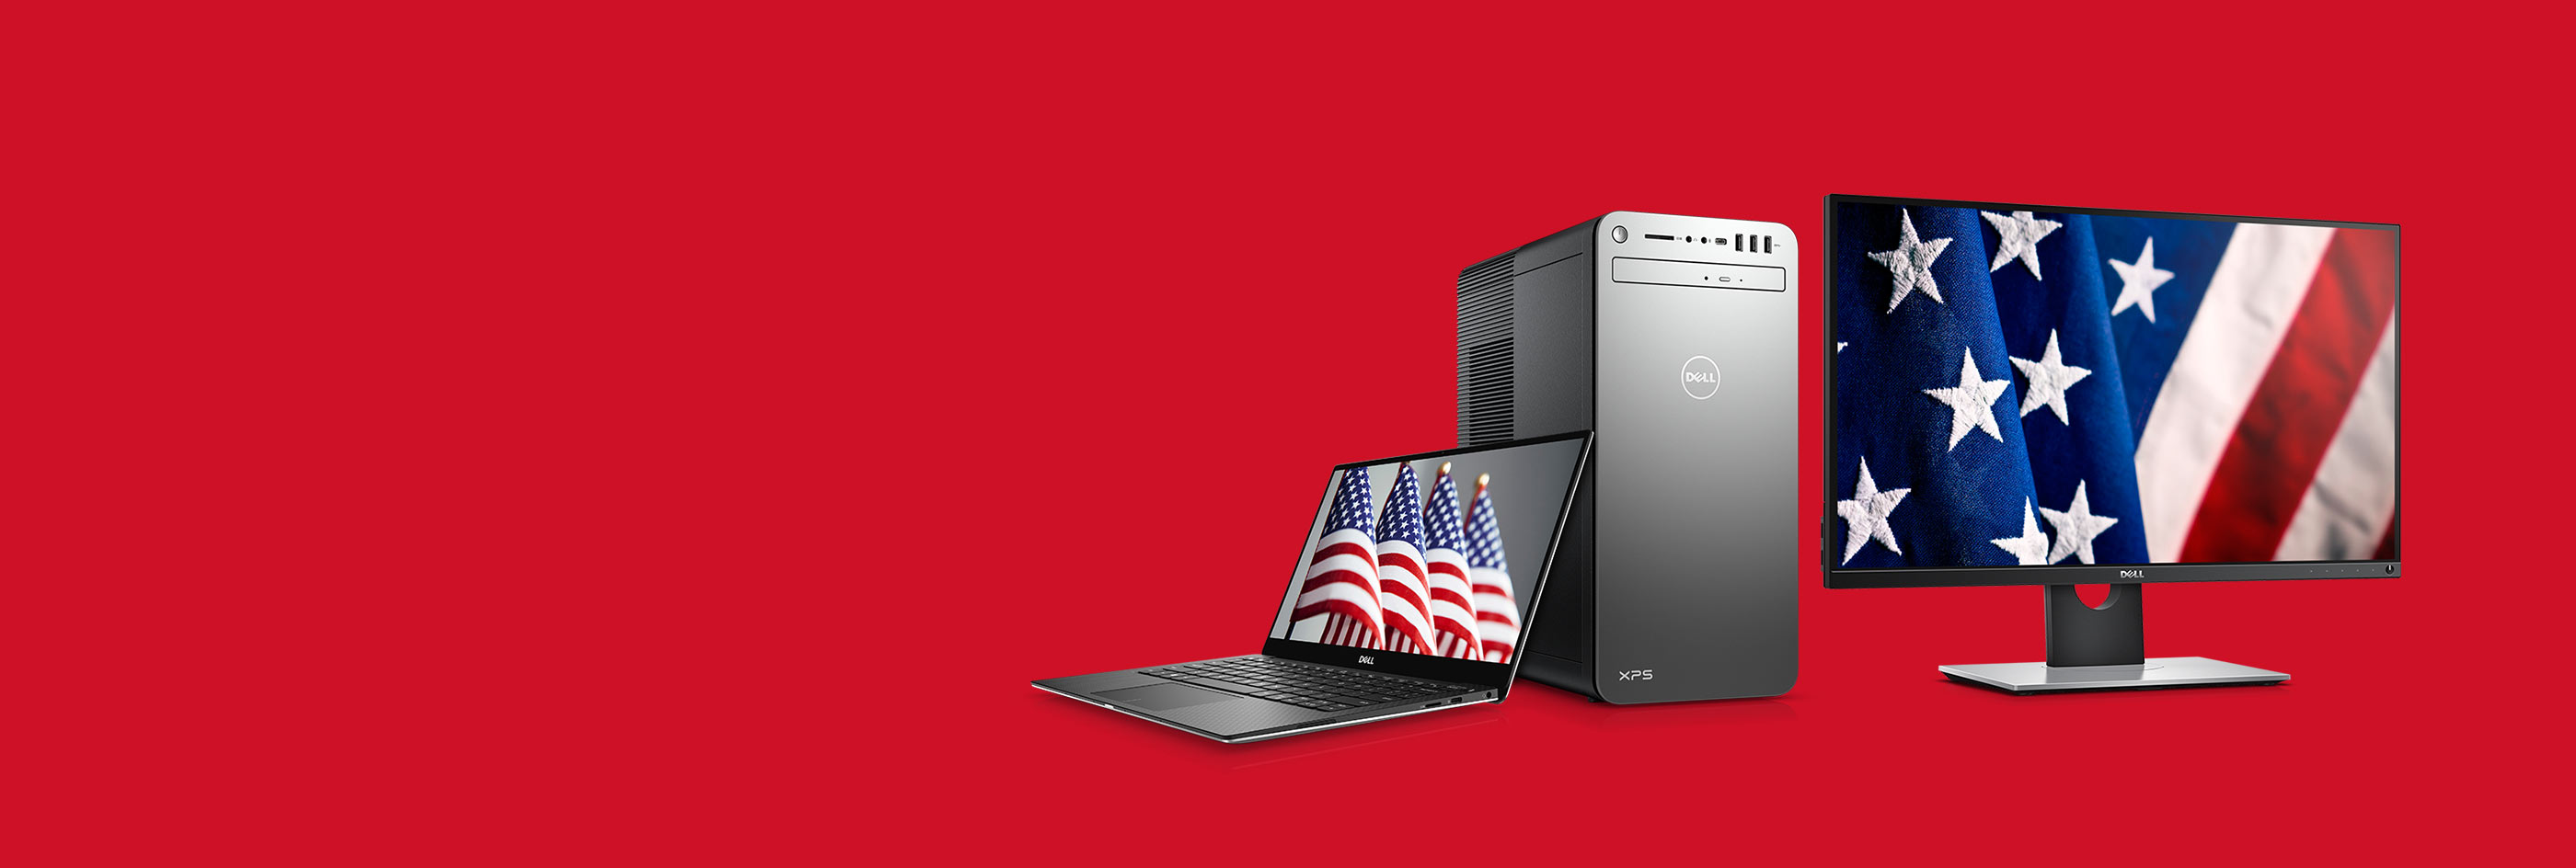 Dell United States Official Site | Dell United States